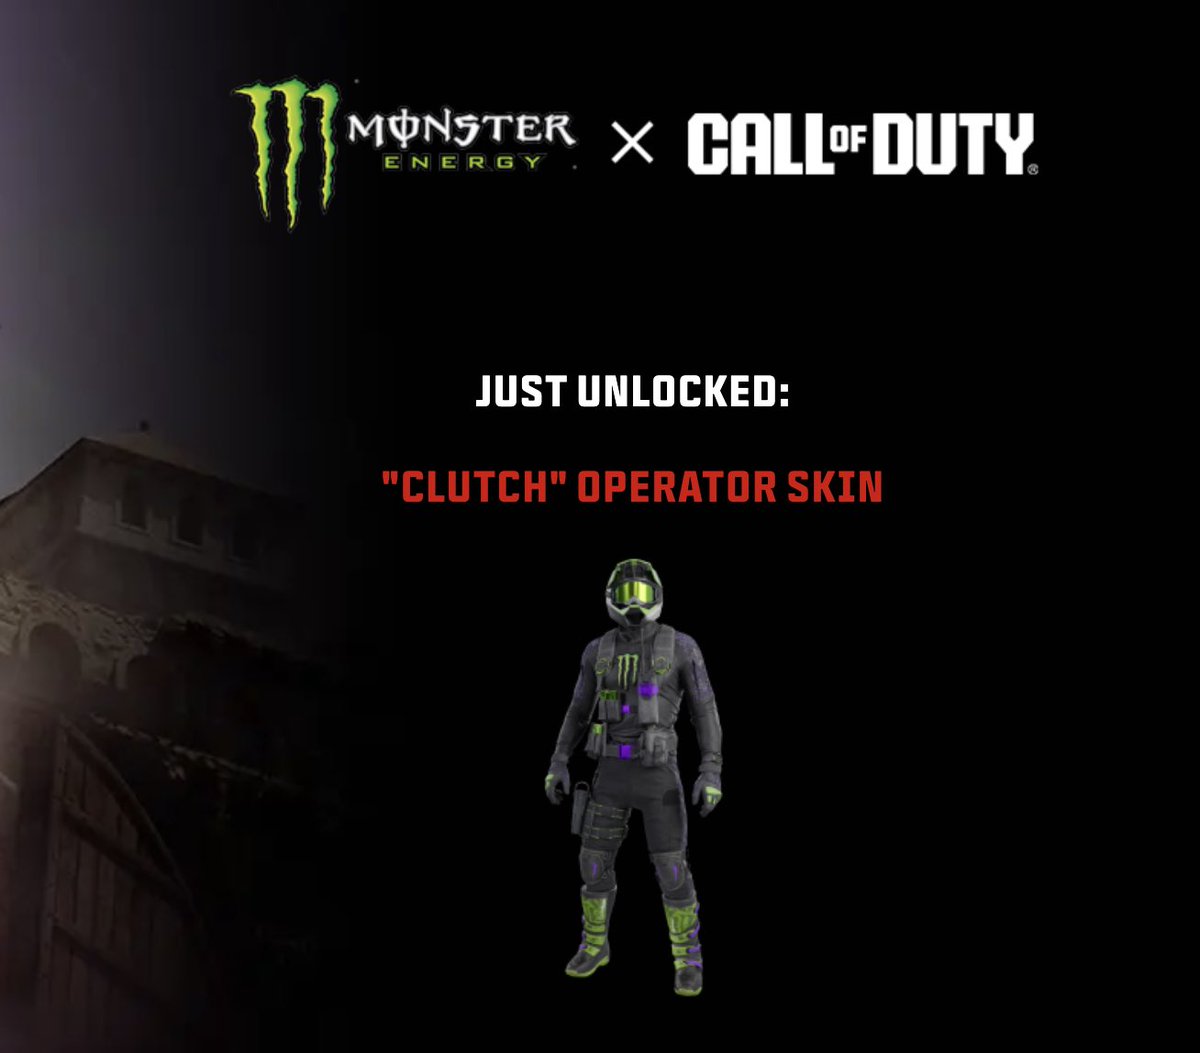 Visit this Call of Duty profile link to unlock a free Monster Energy Skin in MWIII and Warzone: profile.callofduty.com/promotions/red…